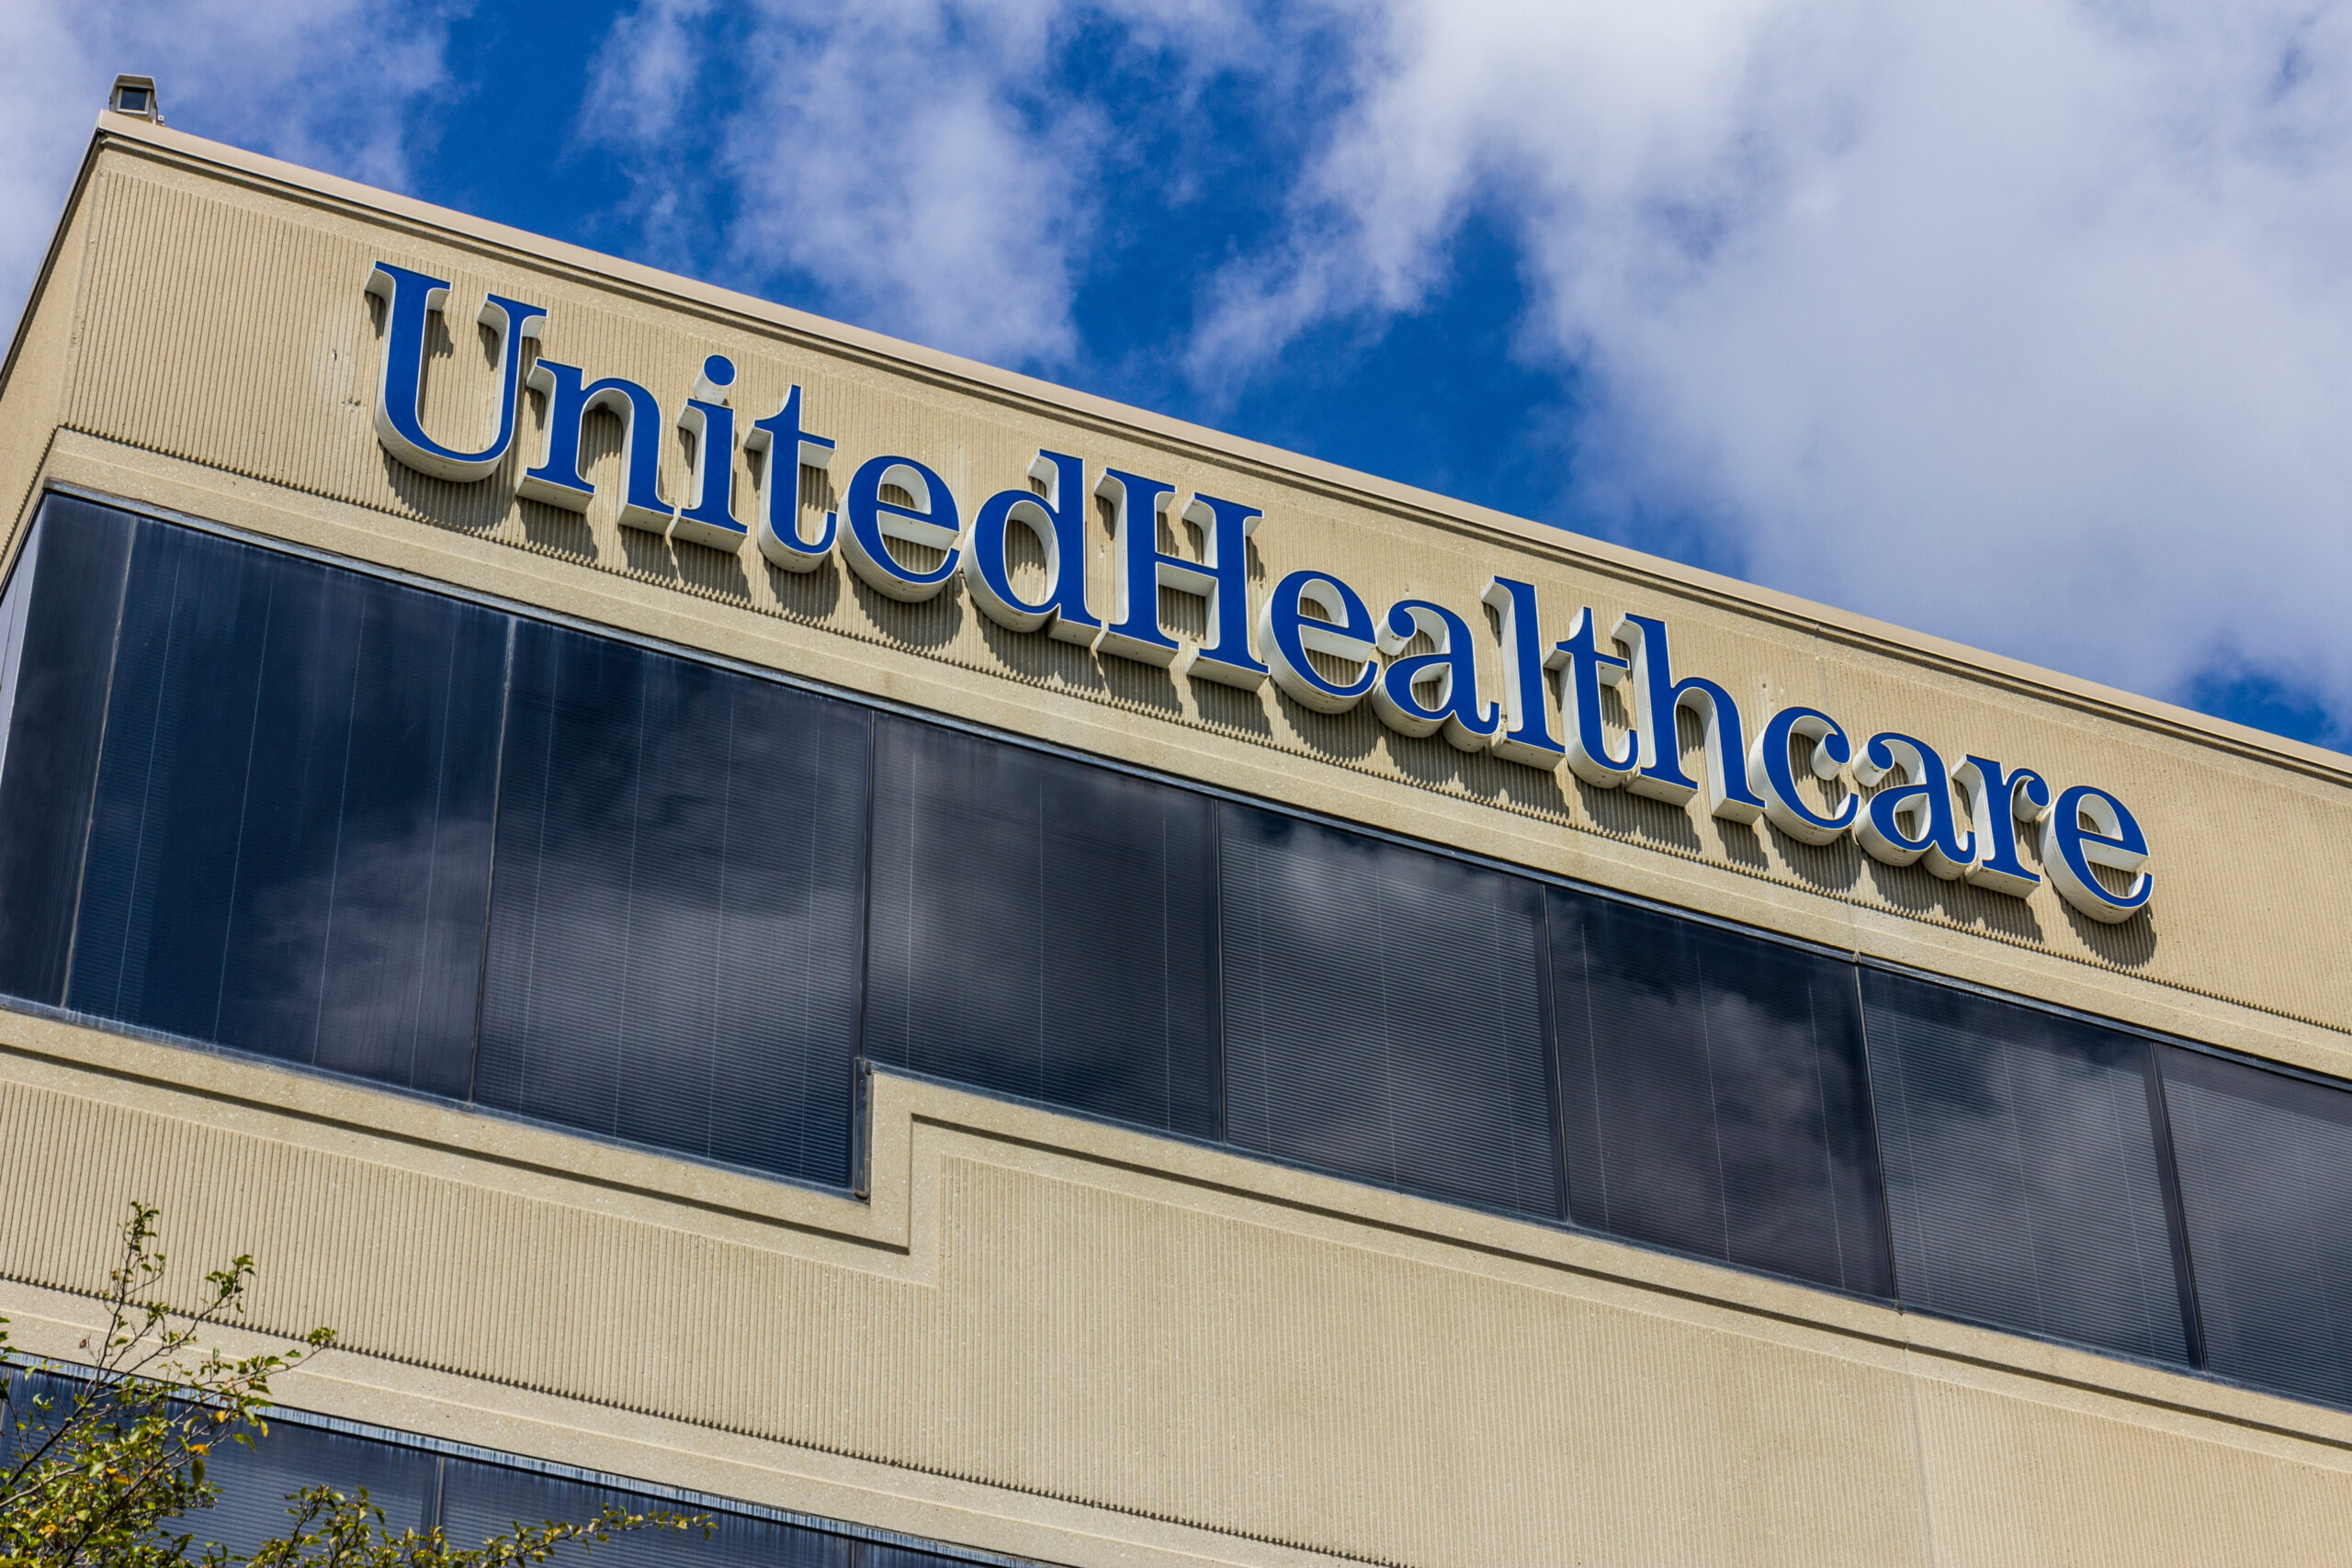 The image is of a building with a sign that reads "UnitedHealthcare." The UnitedHealthcare logo is in a bold, blue font, which stands out against the cream-colored background of the building's facade.